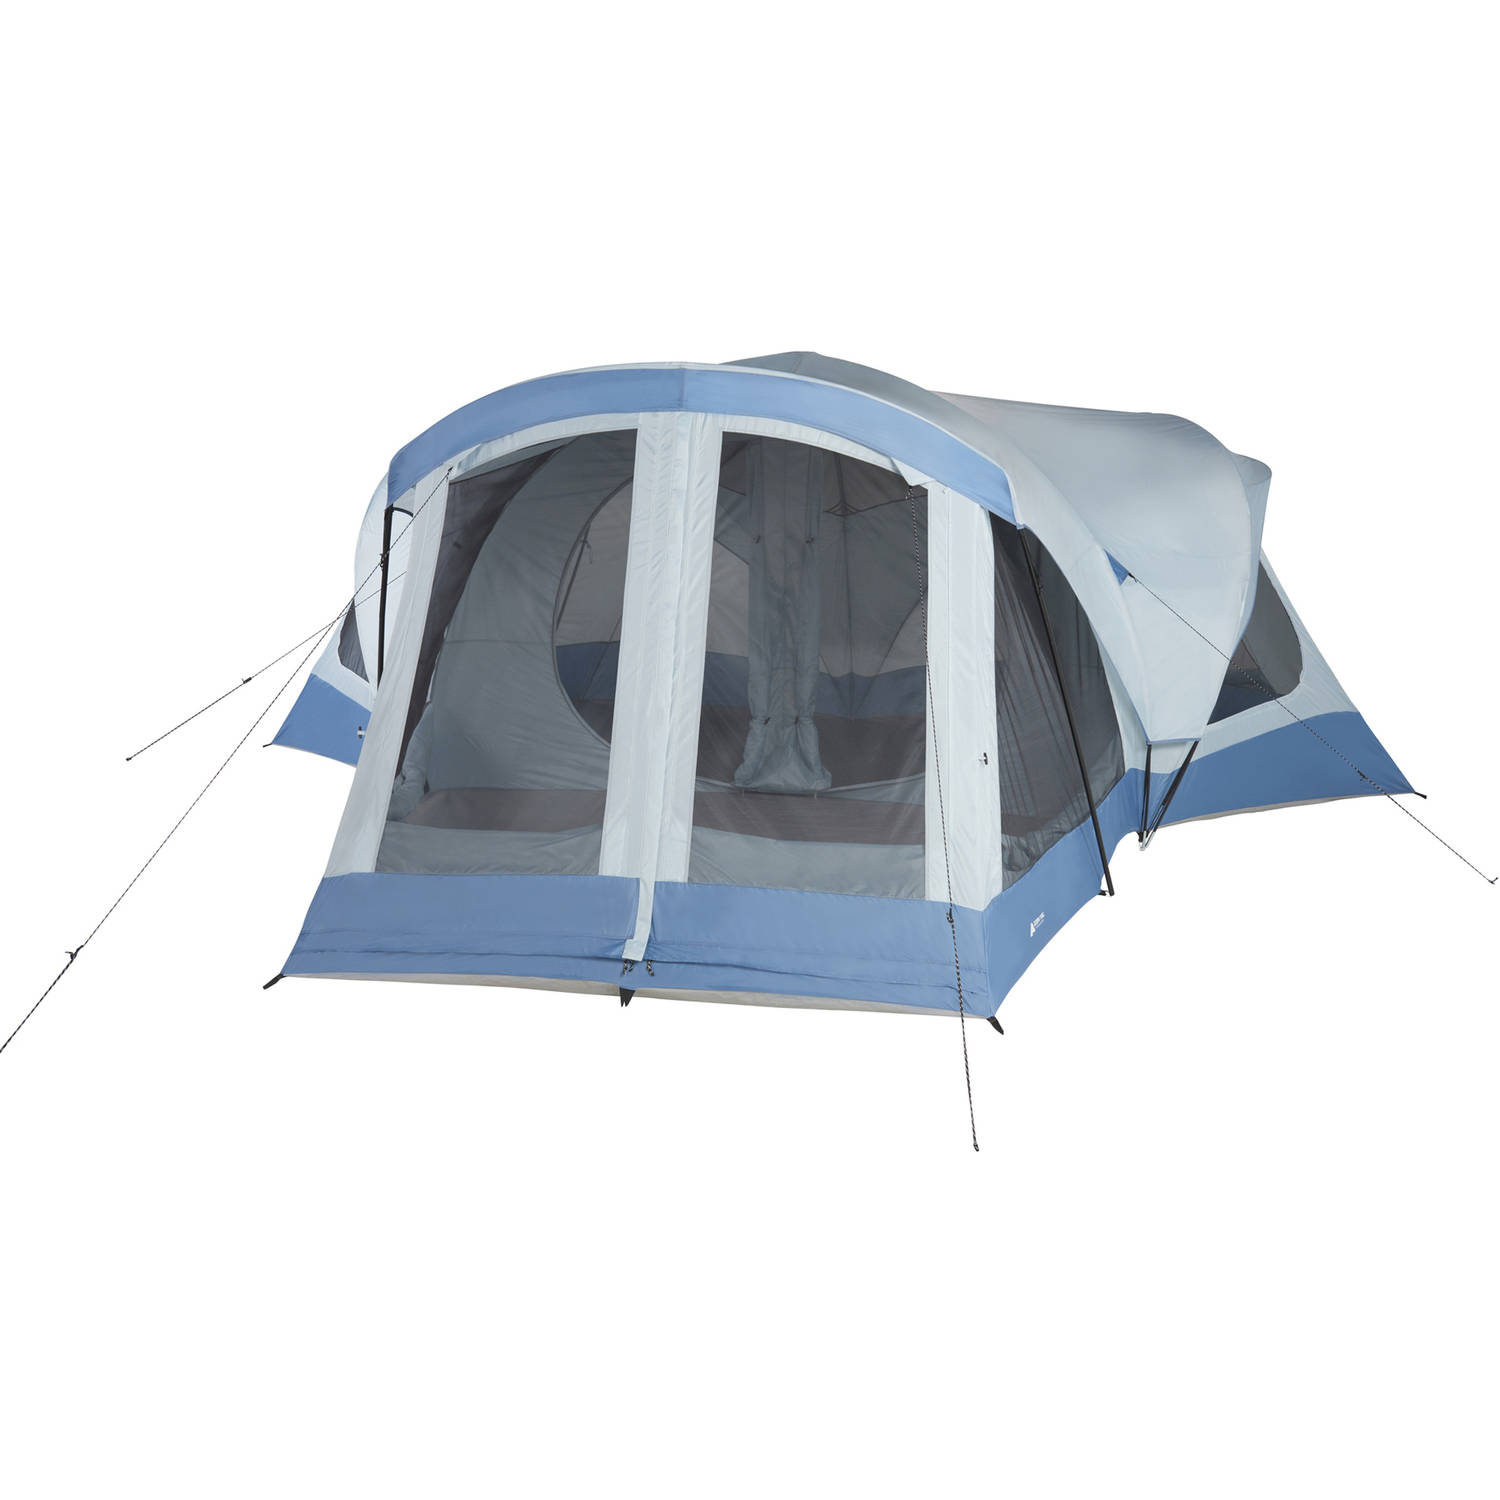 Ozark Trail 14-Person 18 ft. x 18 ft. Family Tent, with 3 Doors - image 1 of 8